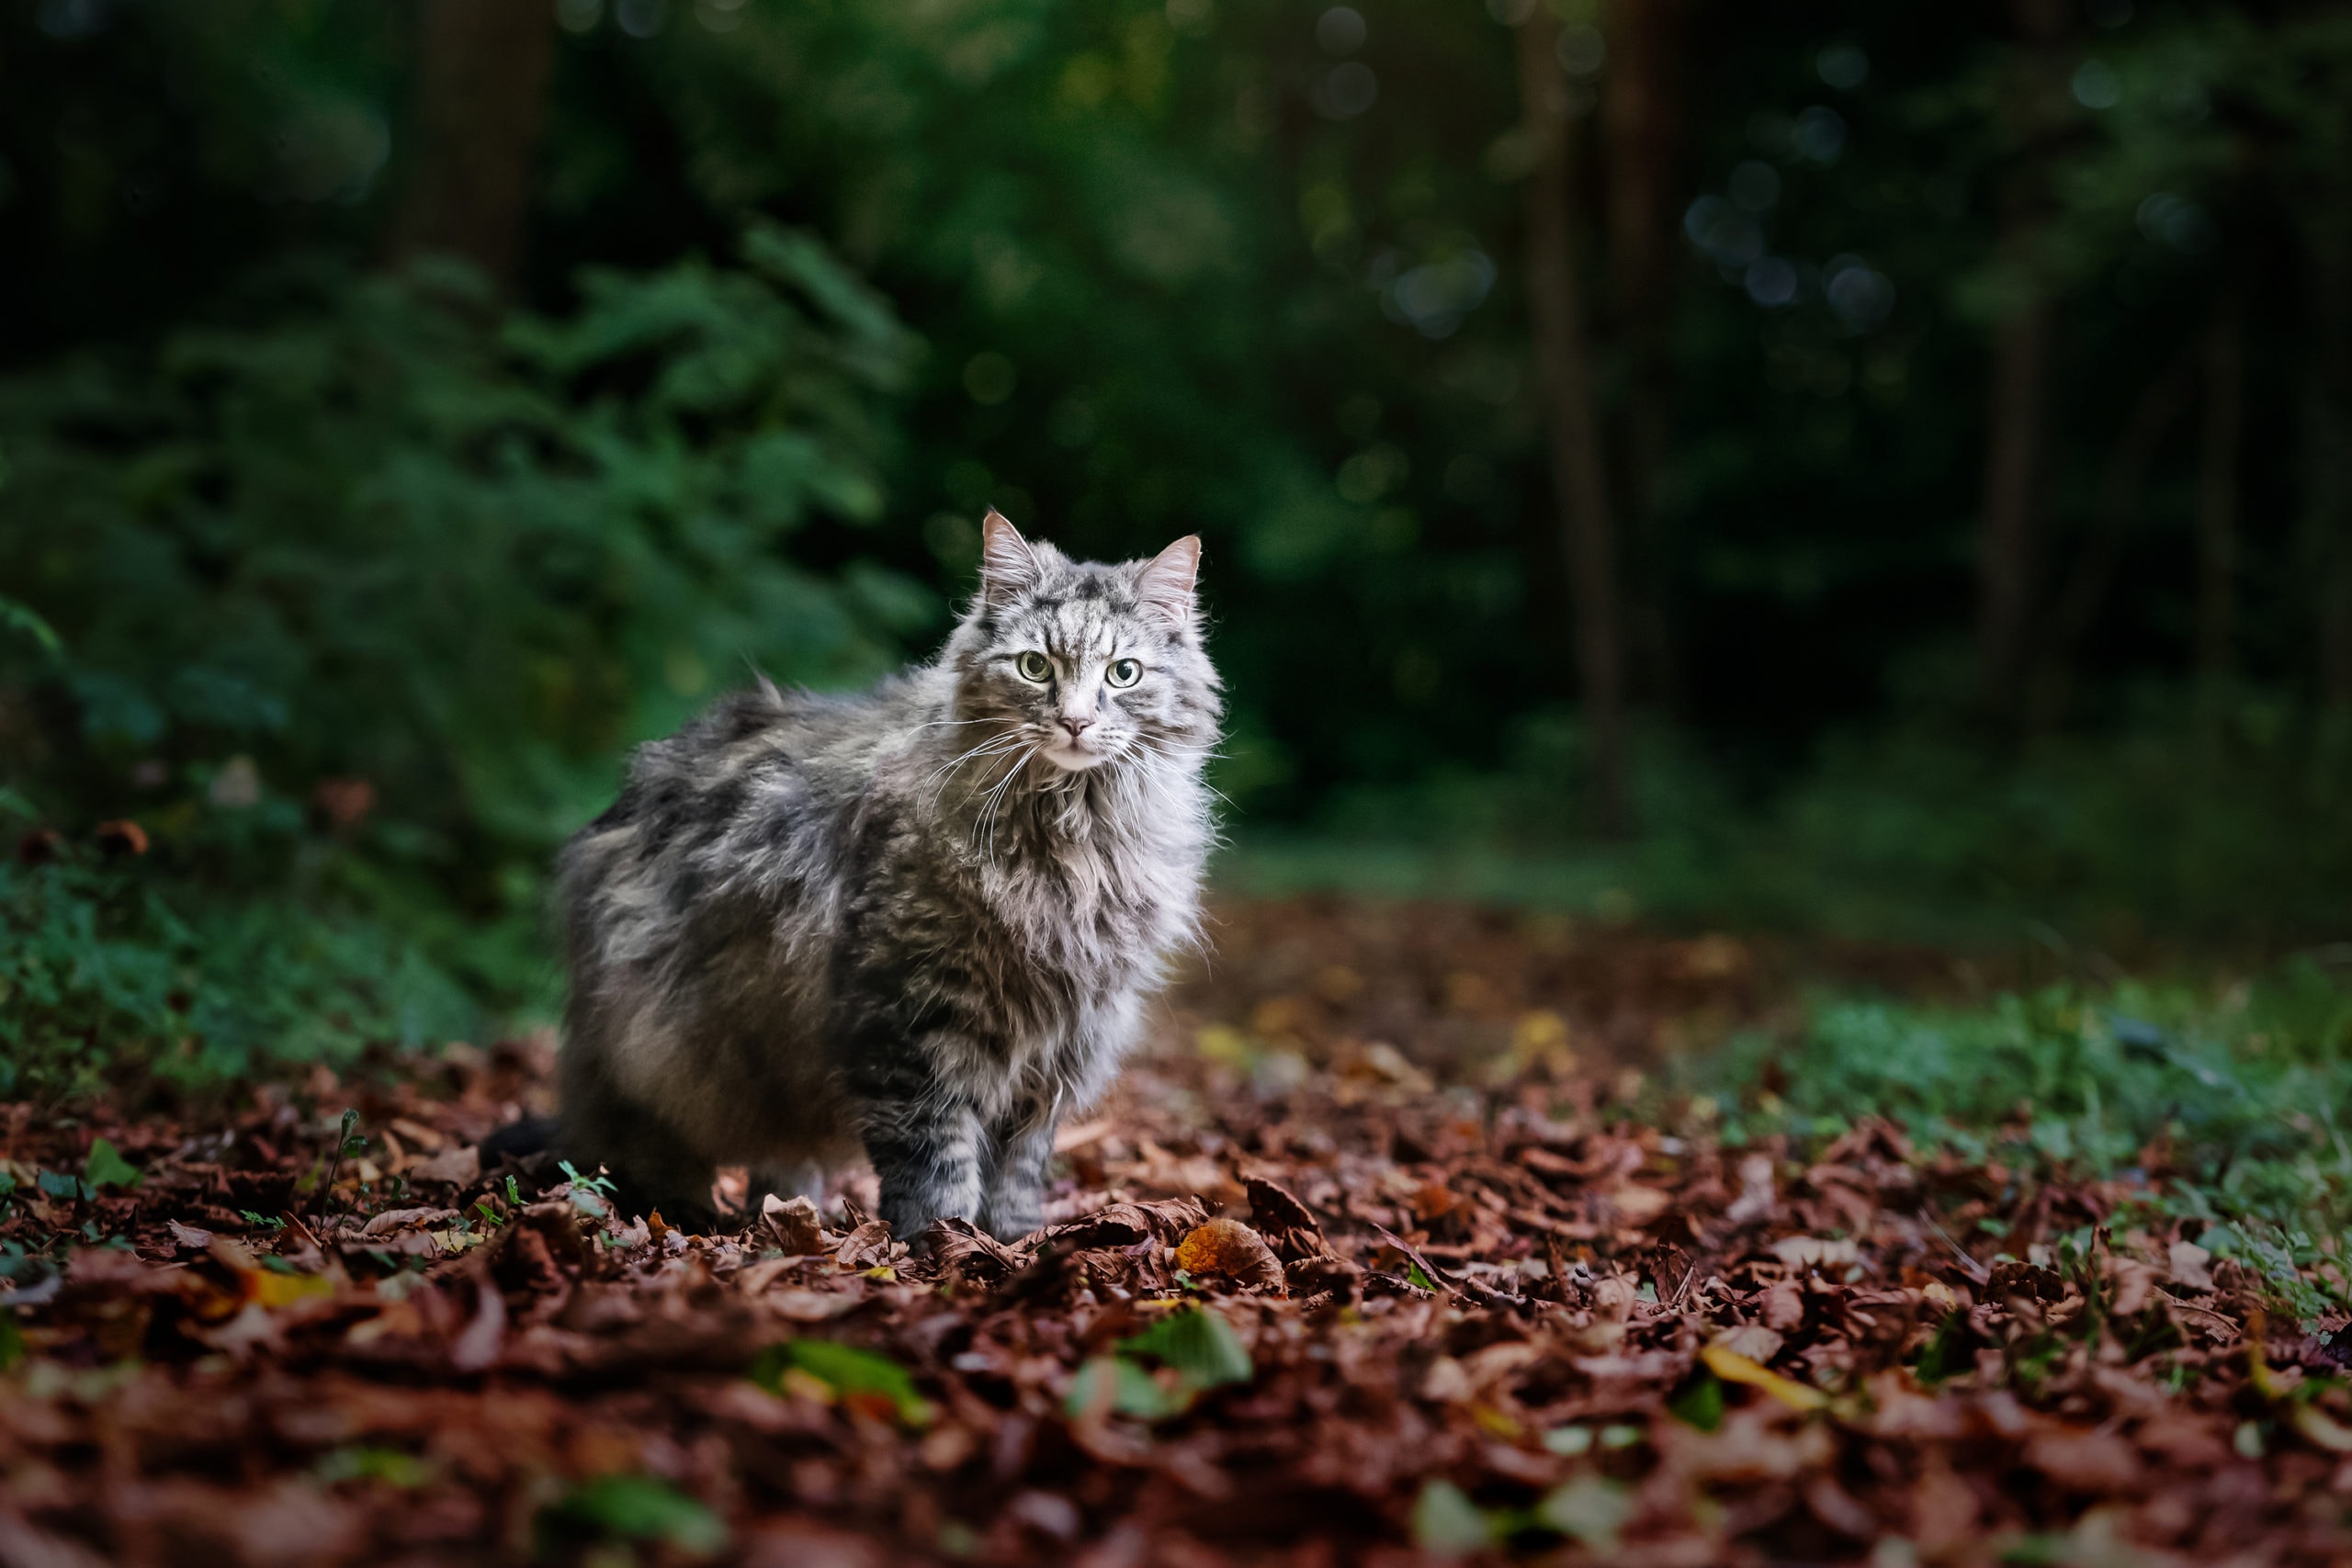 Nic Bisseker photography cat photoshoot east grinstead